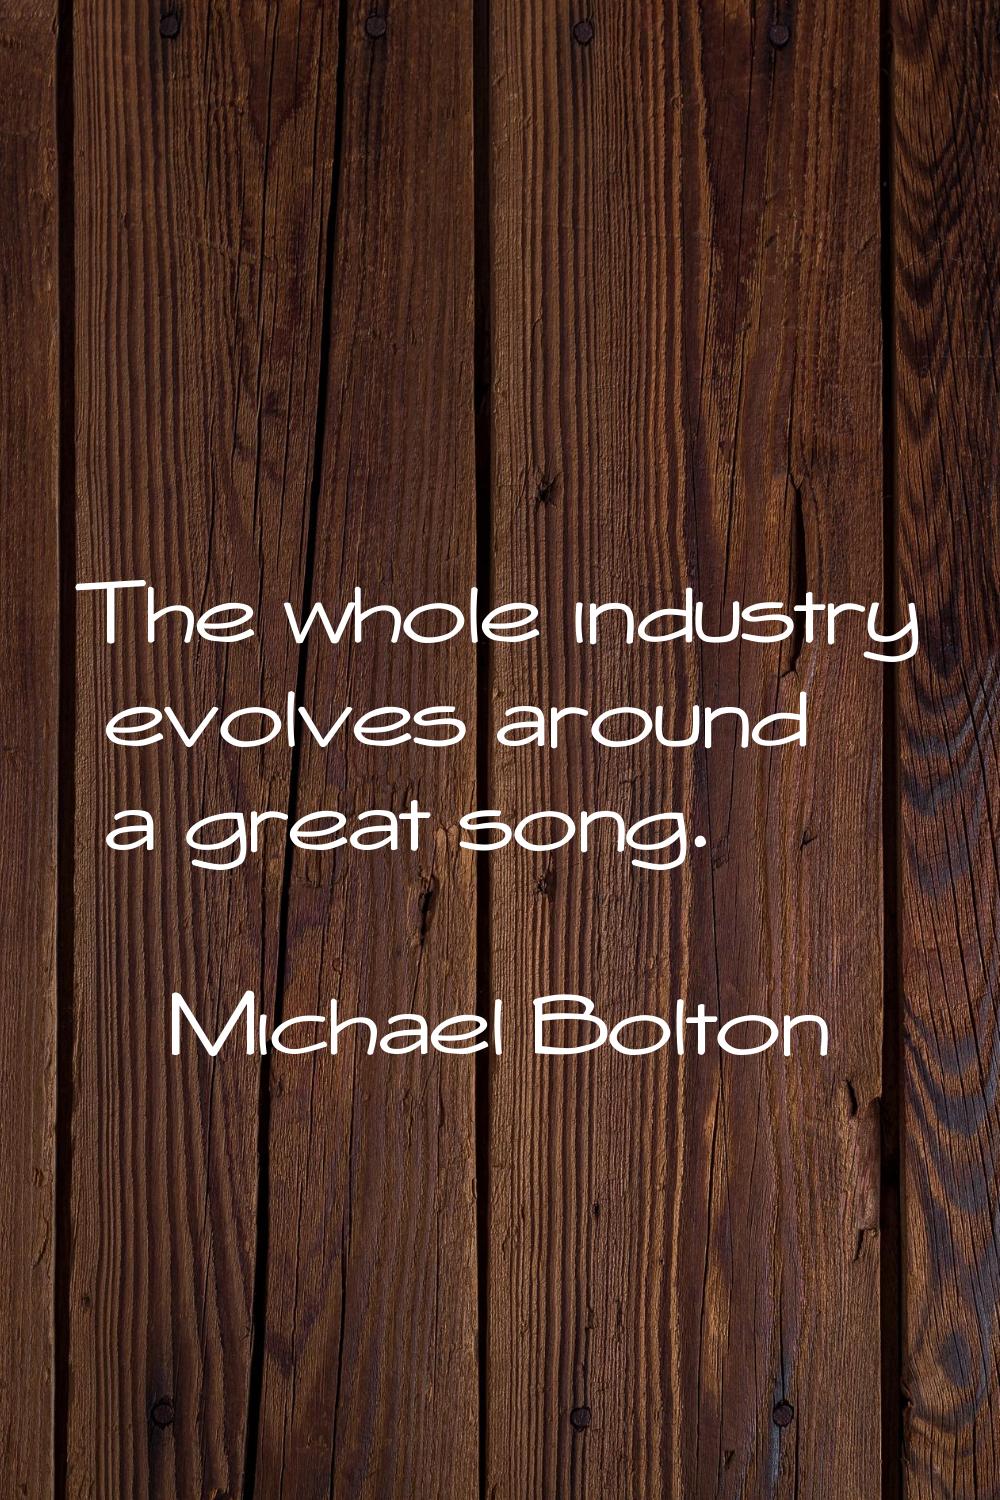 The whole industry evolves around a great song.